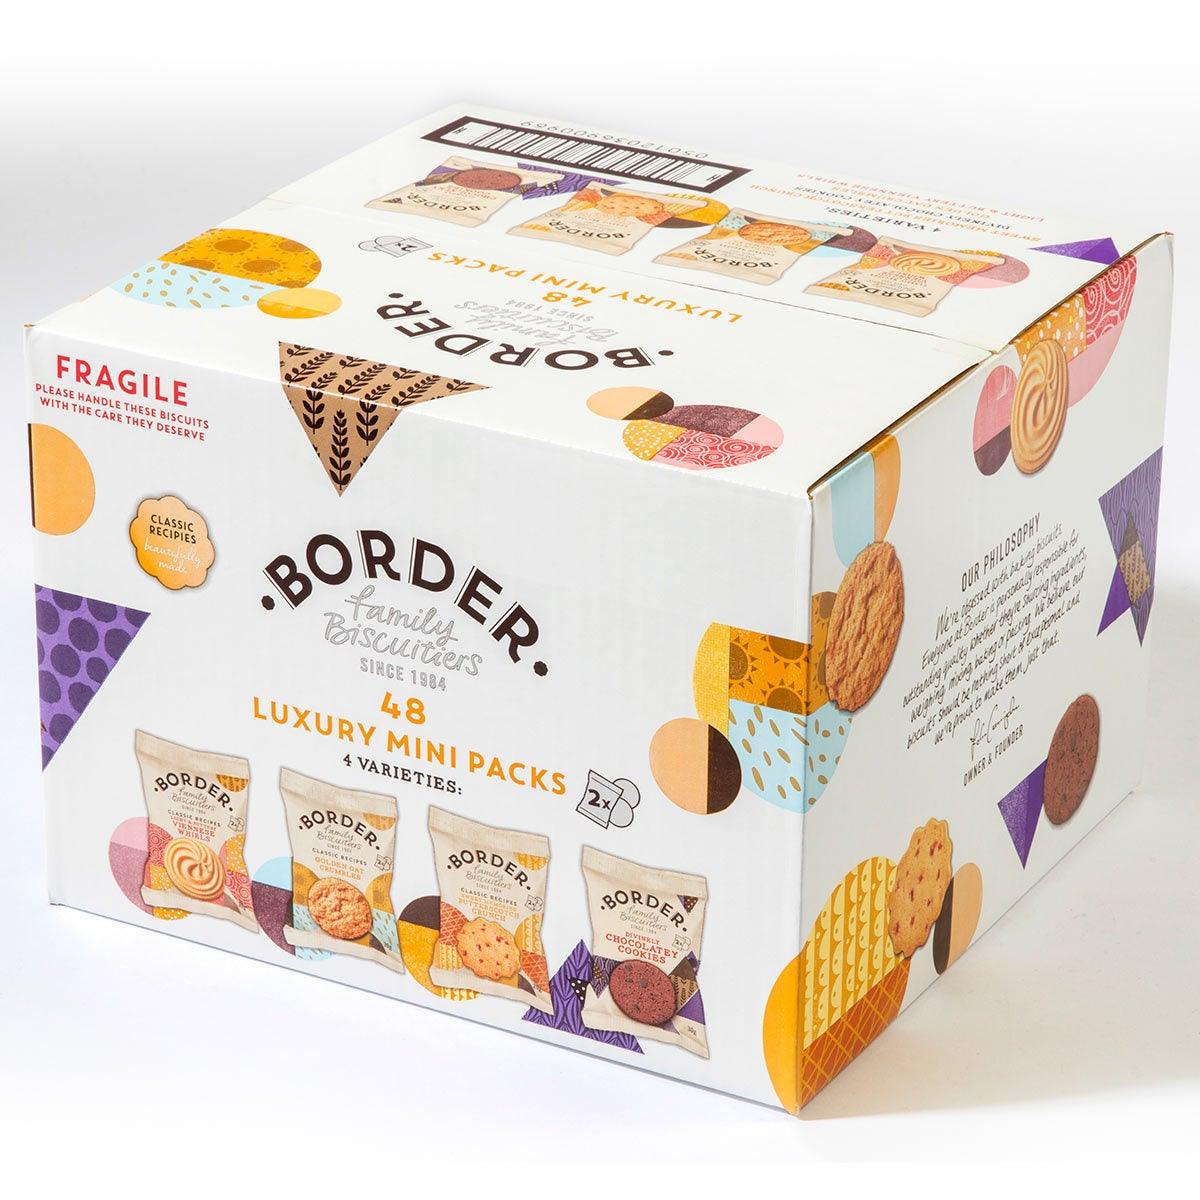 Border Biscuits Luxury Mini Pack Assortment, 48 x 2 Biscuits Snacks Costco UK Pack  